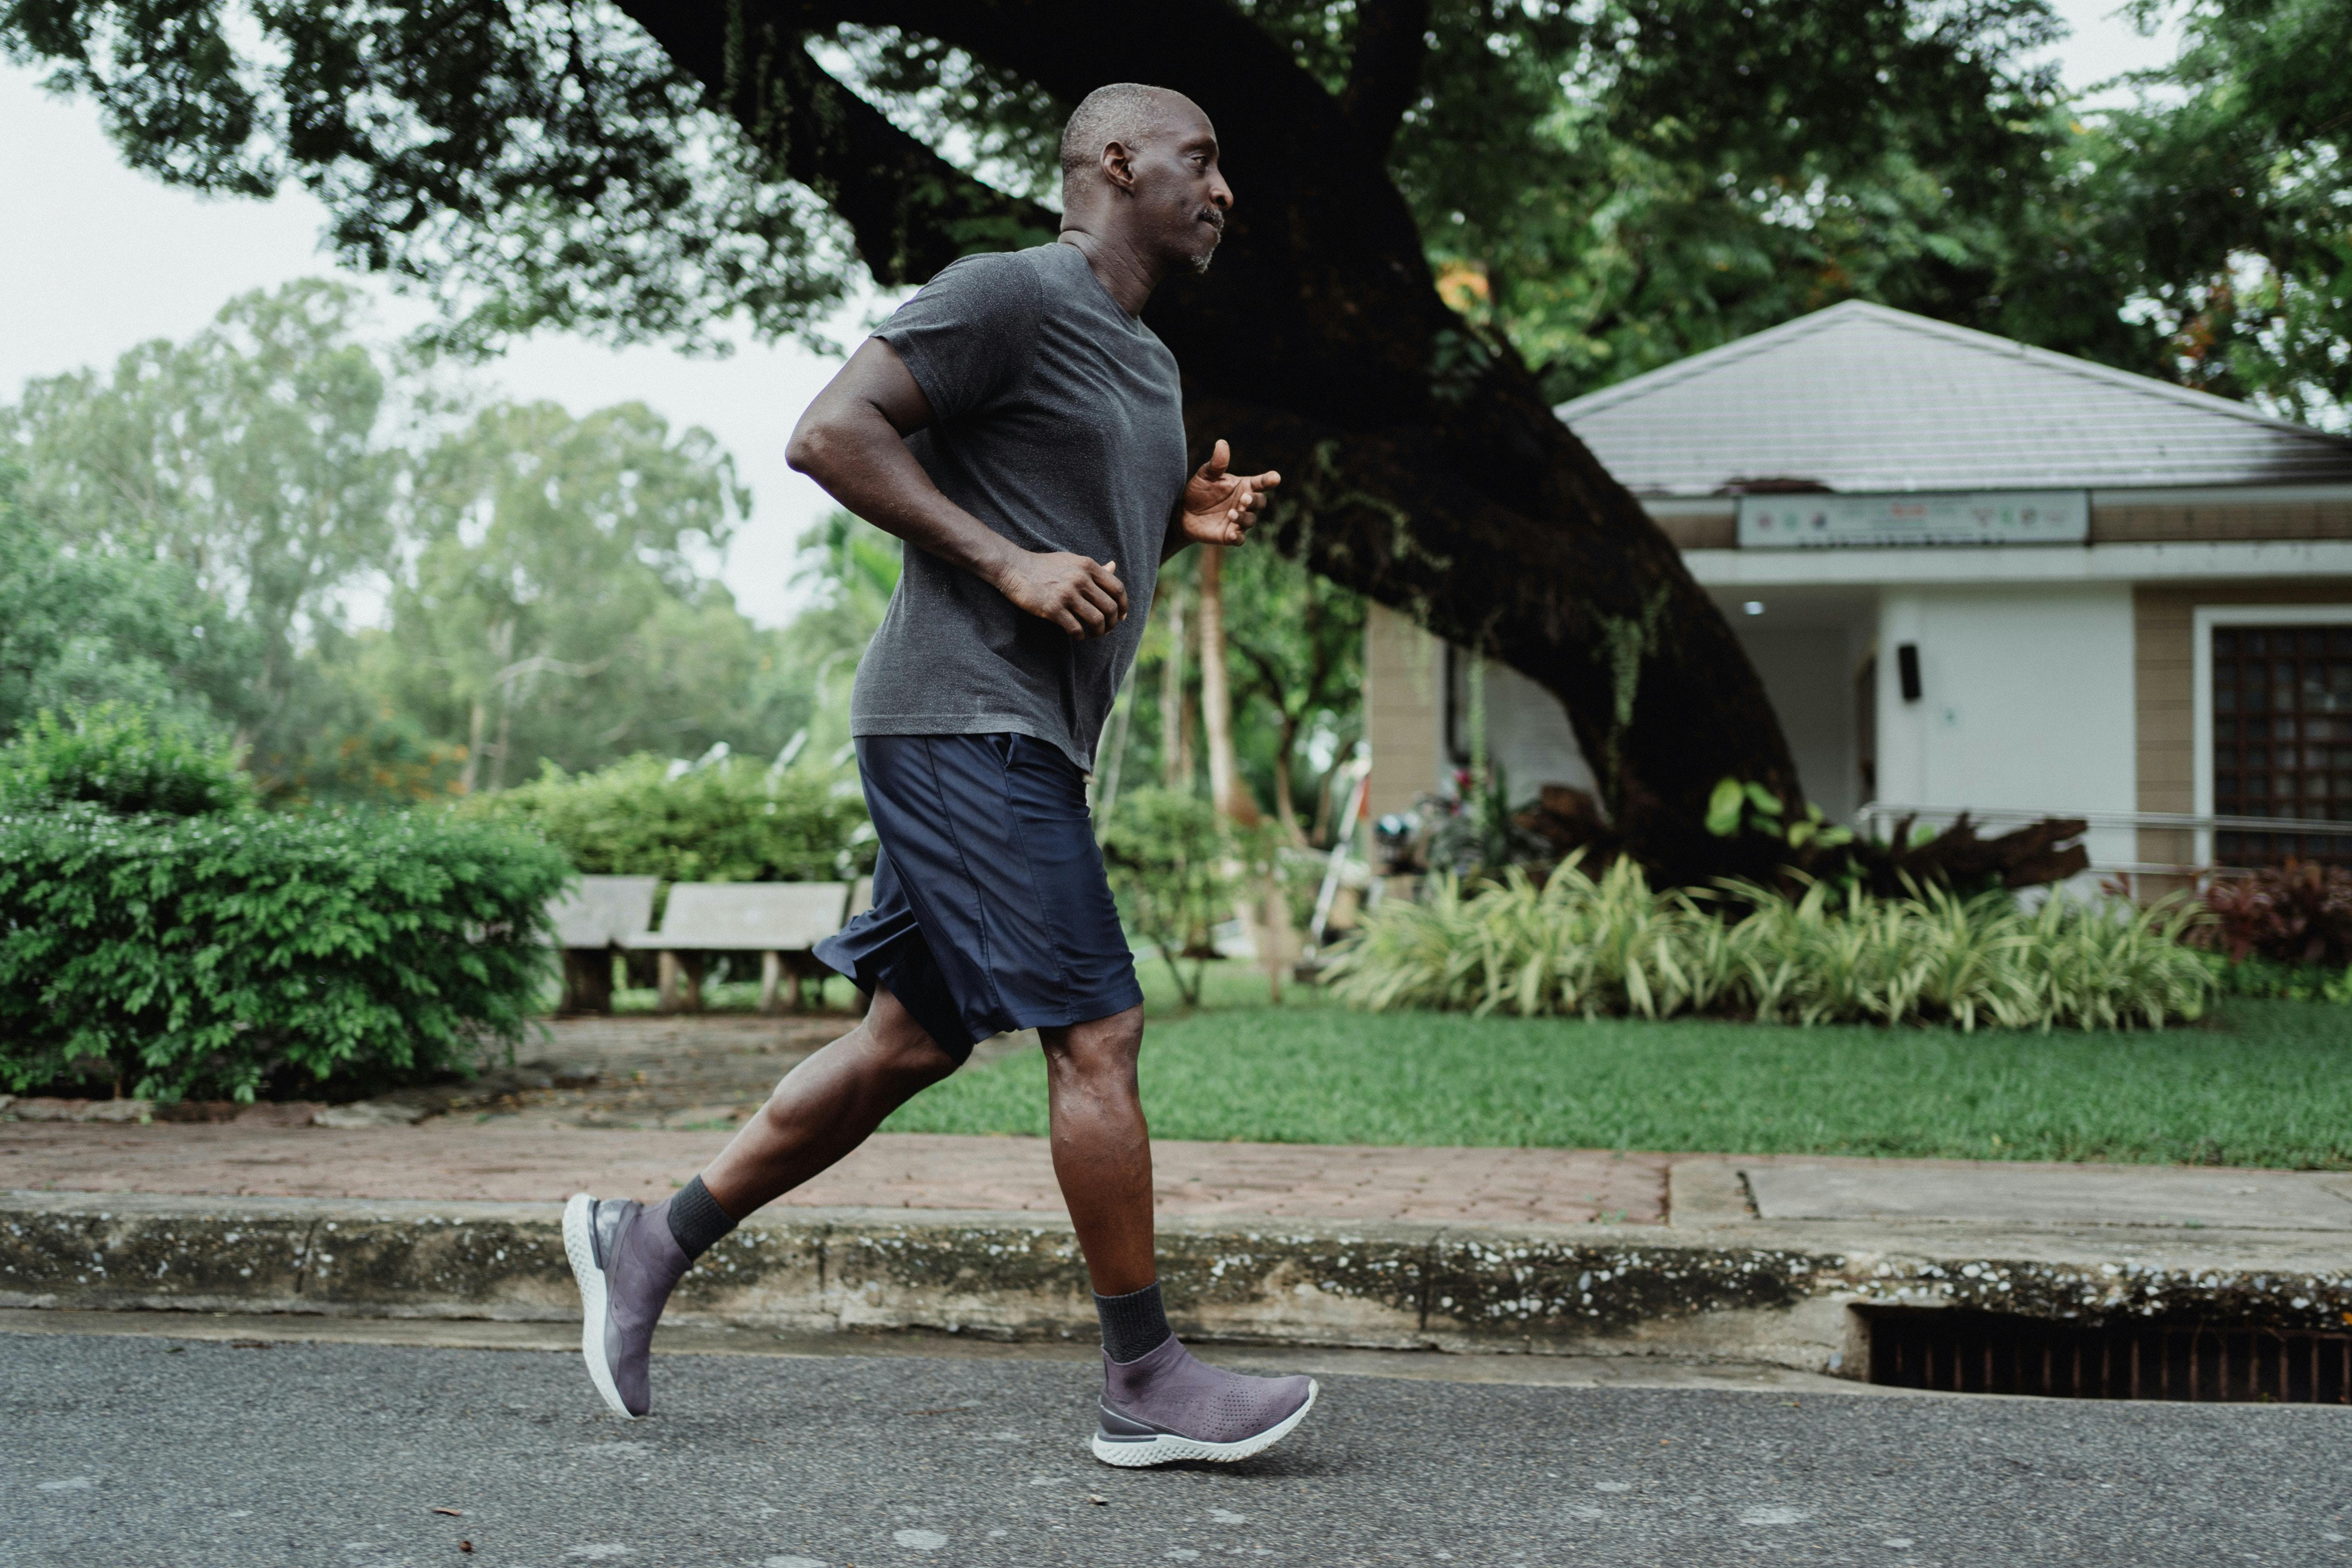 A man jogging down a residential road.